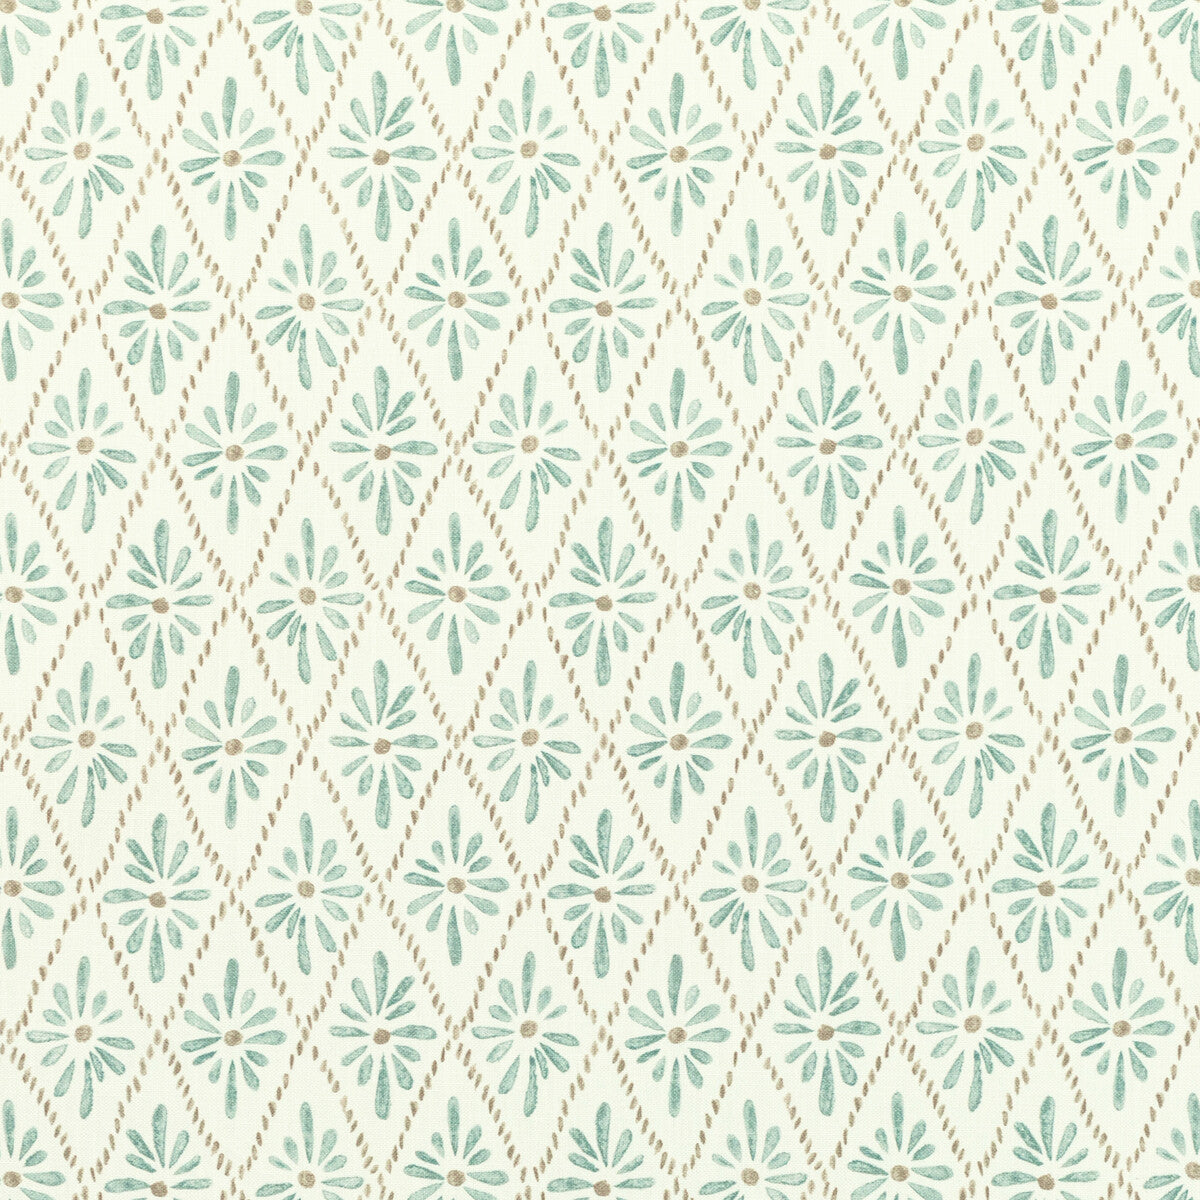 Malina fabric in mineral color - pattern MALINA.135.0 - by Kravet Basics in the Monterey collection